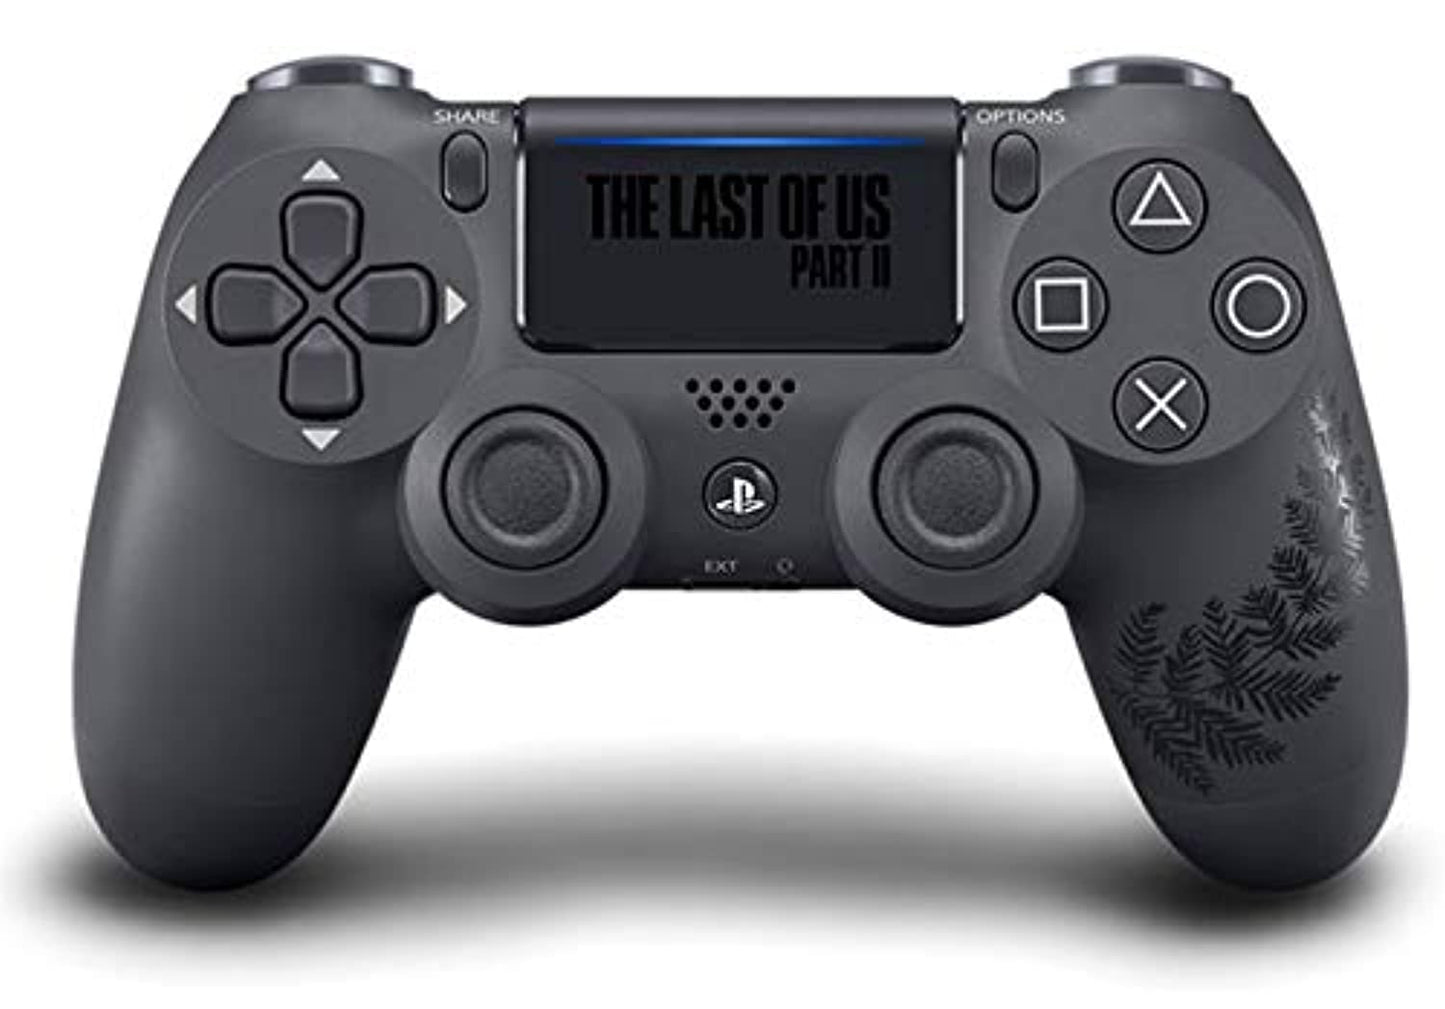 Limited Edition The Last of Us Part II DualShock 4 Wireless Controller (PS4)